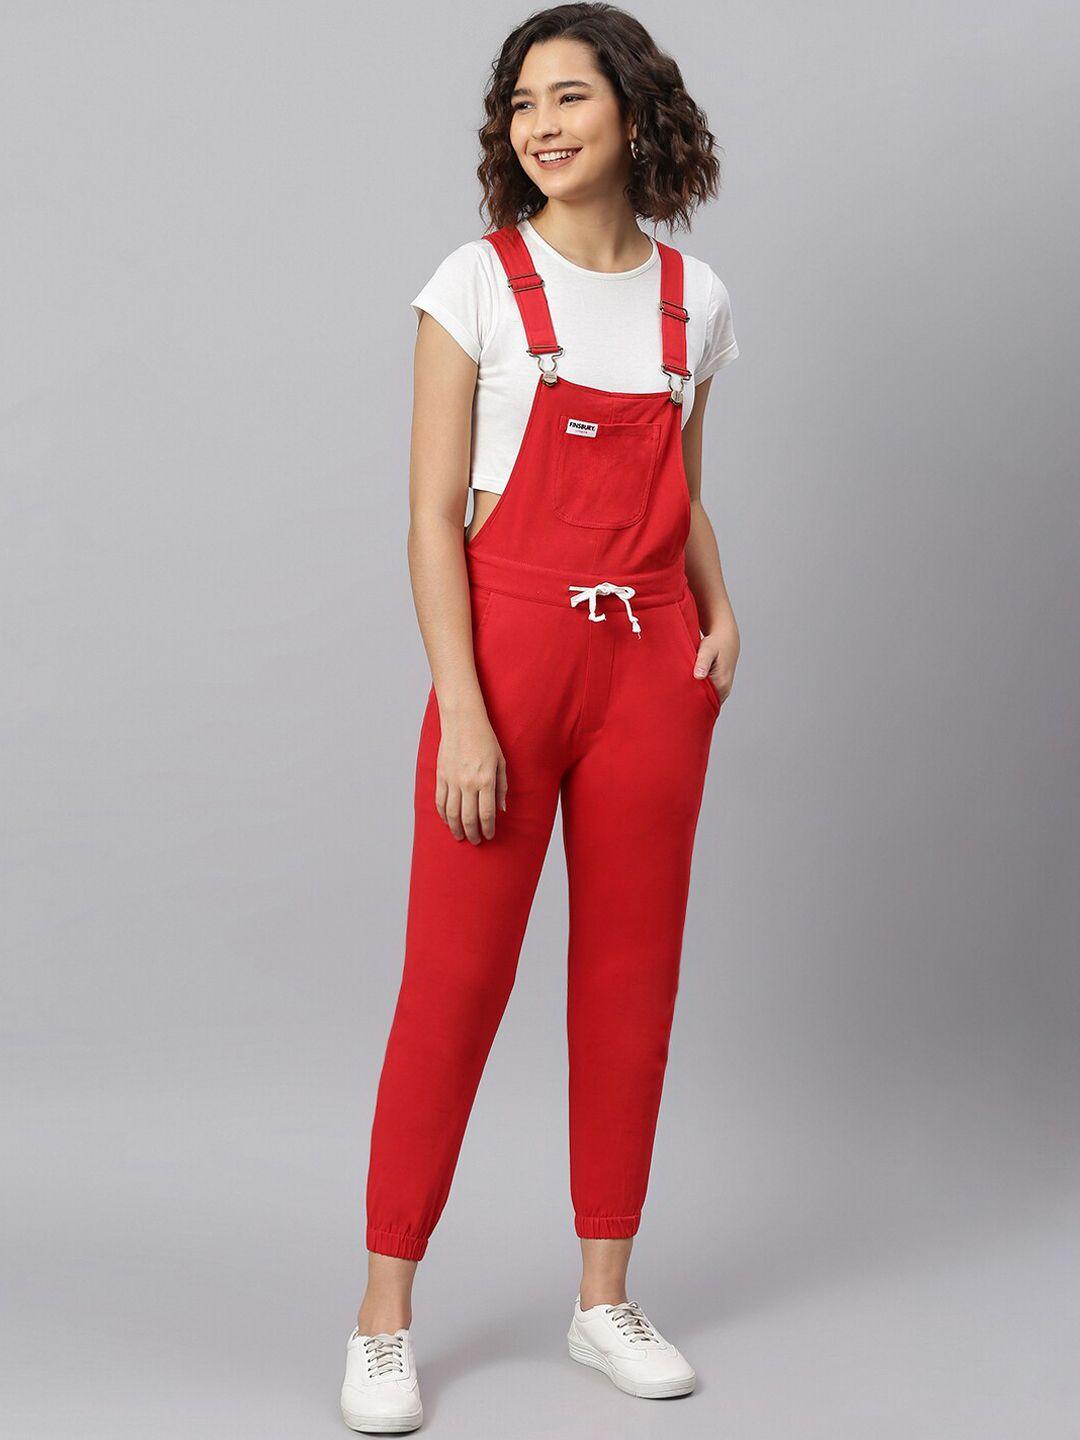 finsbury london women red solid dungarees